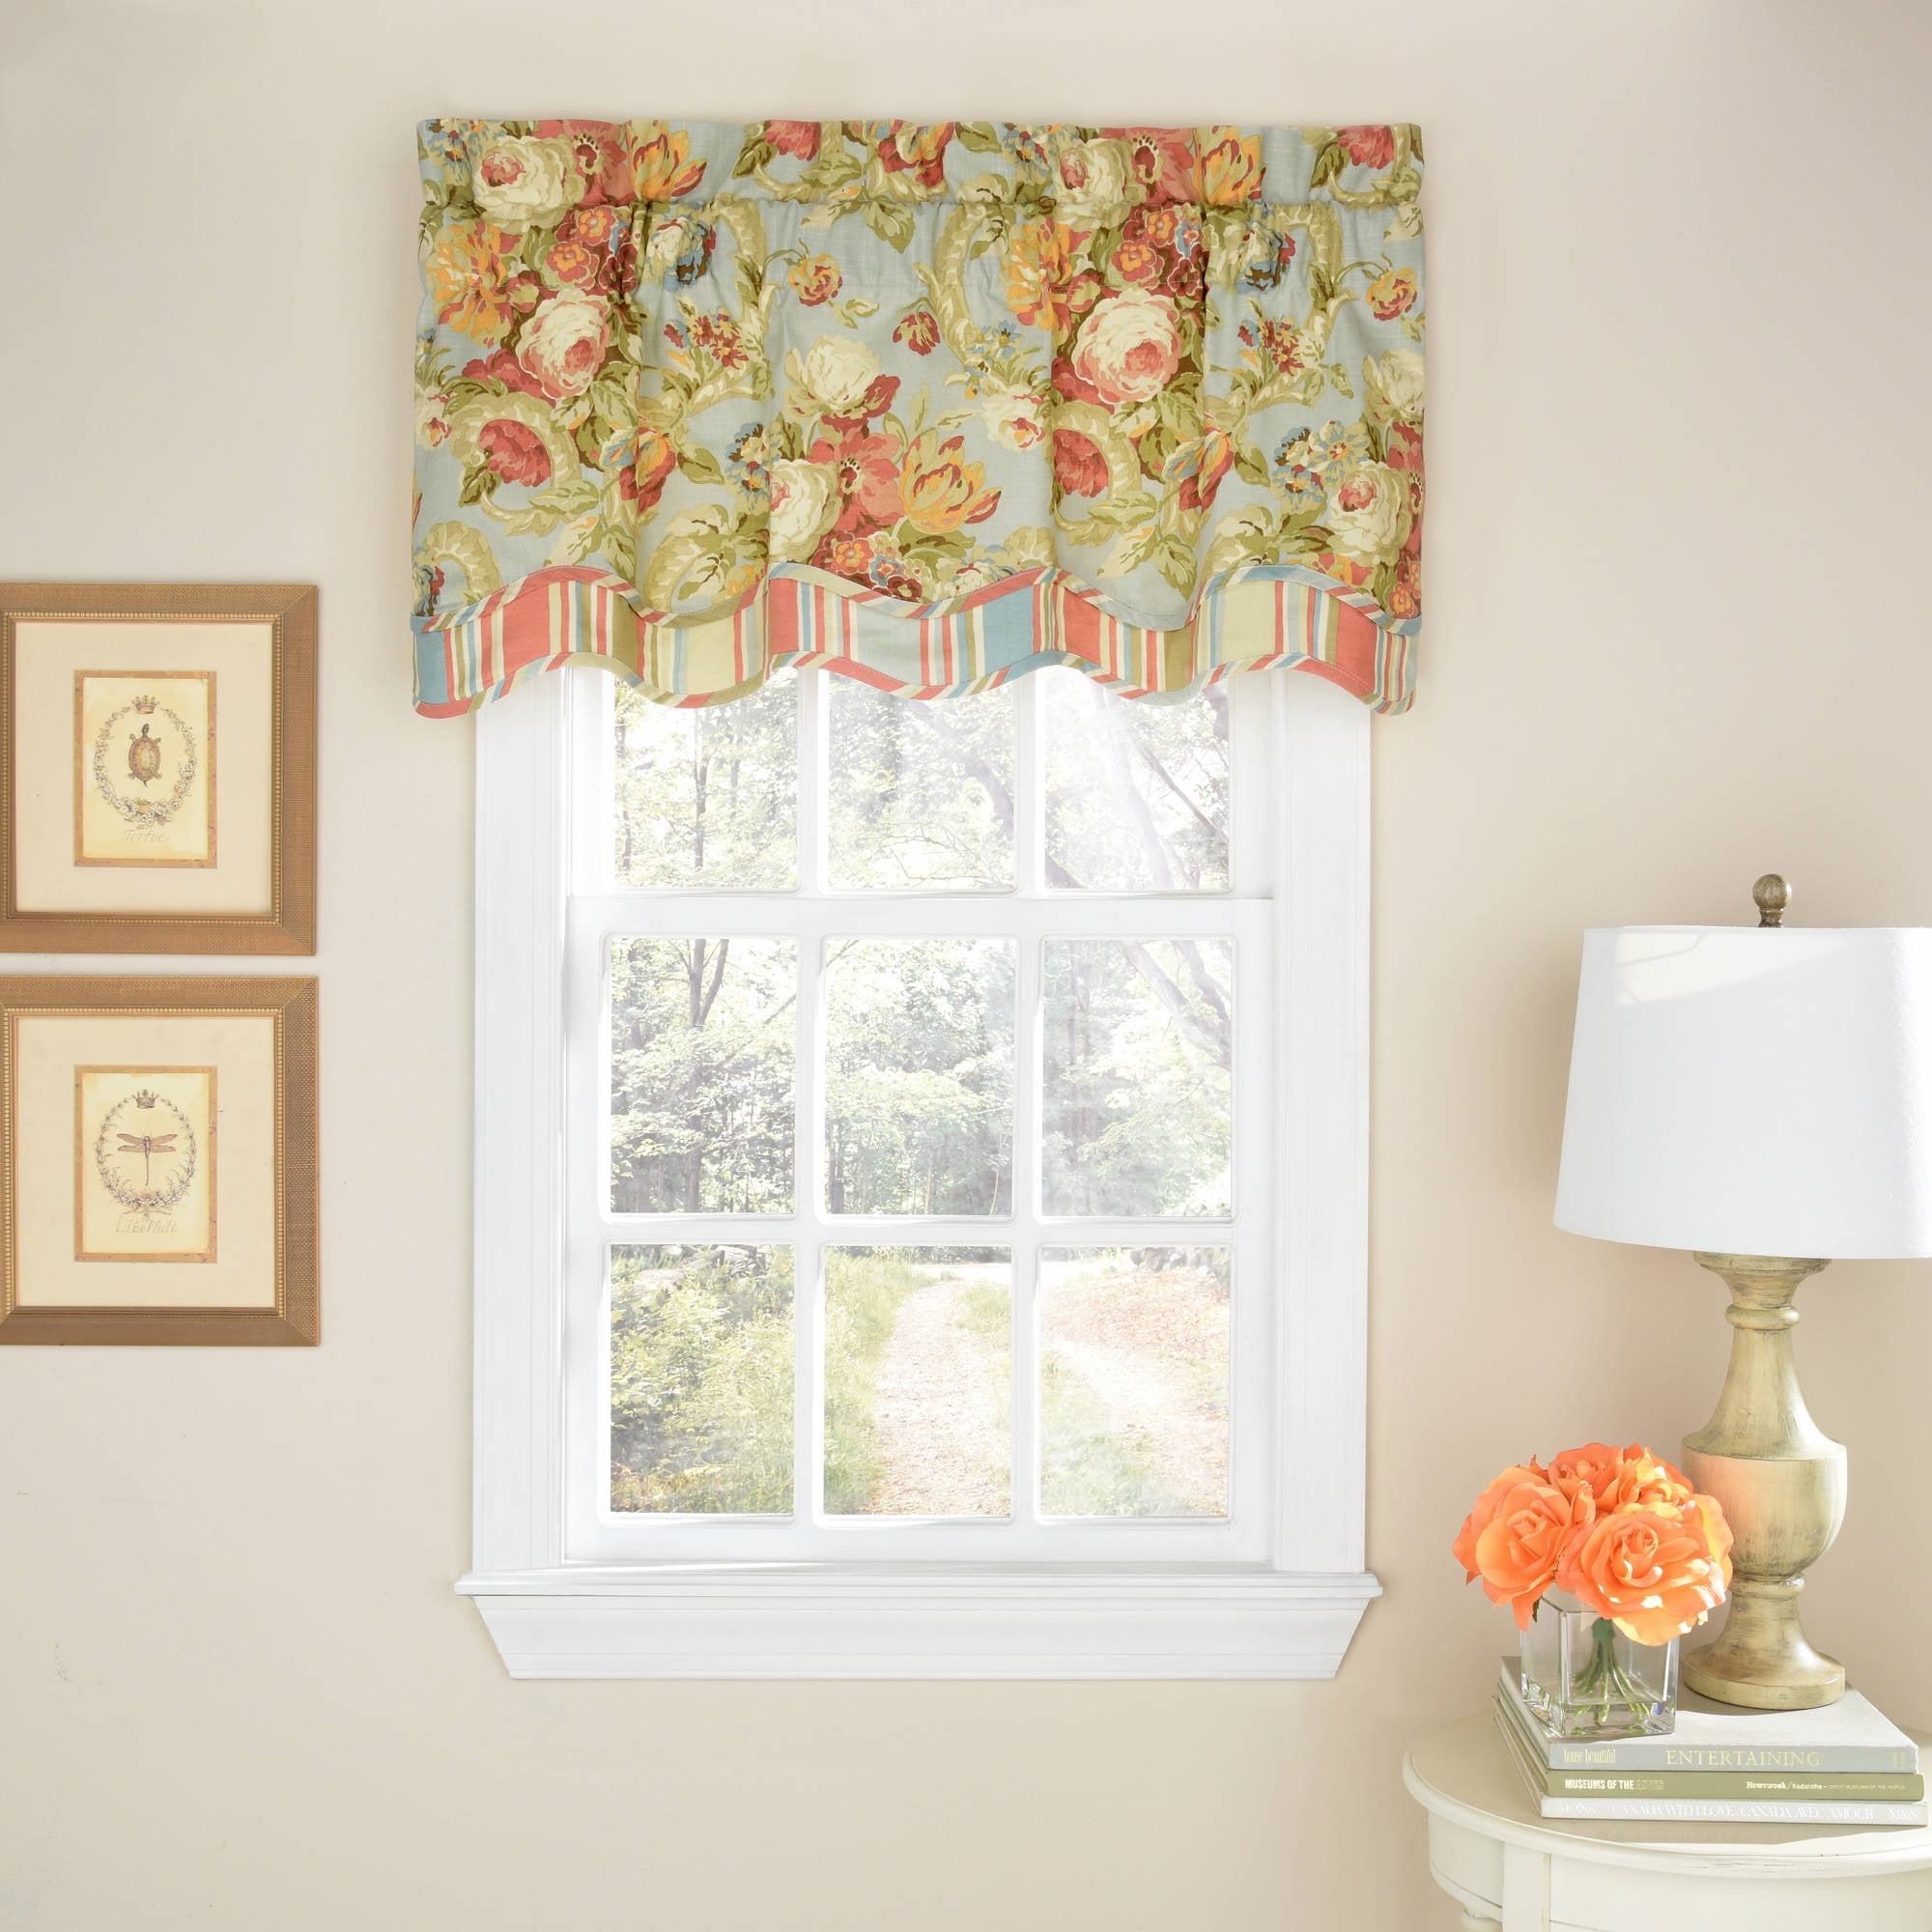 *WAVERLY PAISLEY PRISM LATTE MODERN ESSENTIALS SCALLOPED LINED Valance Curtains! 